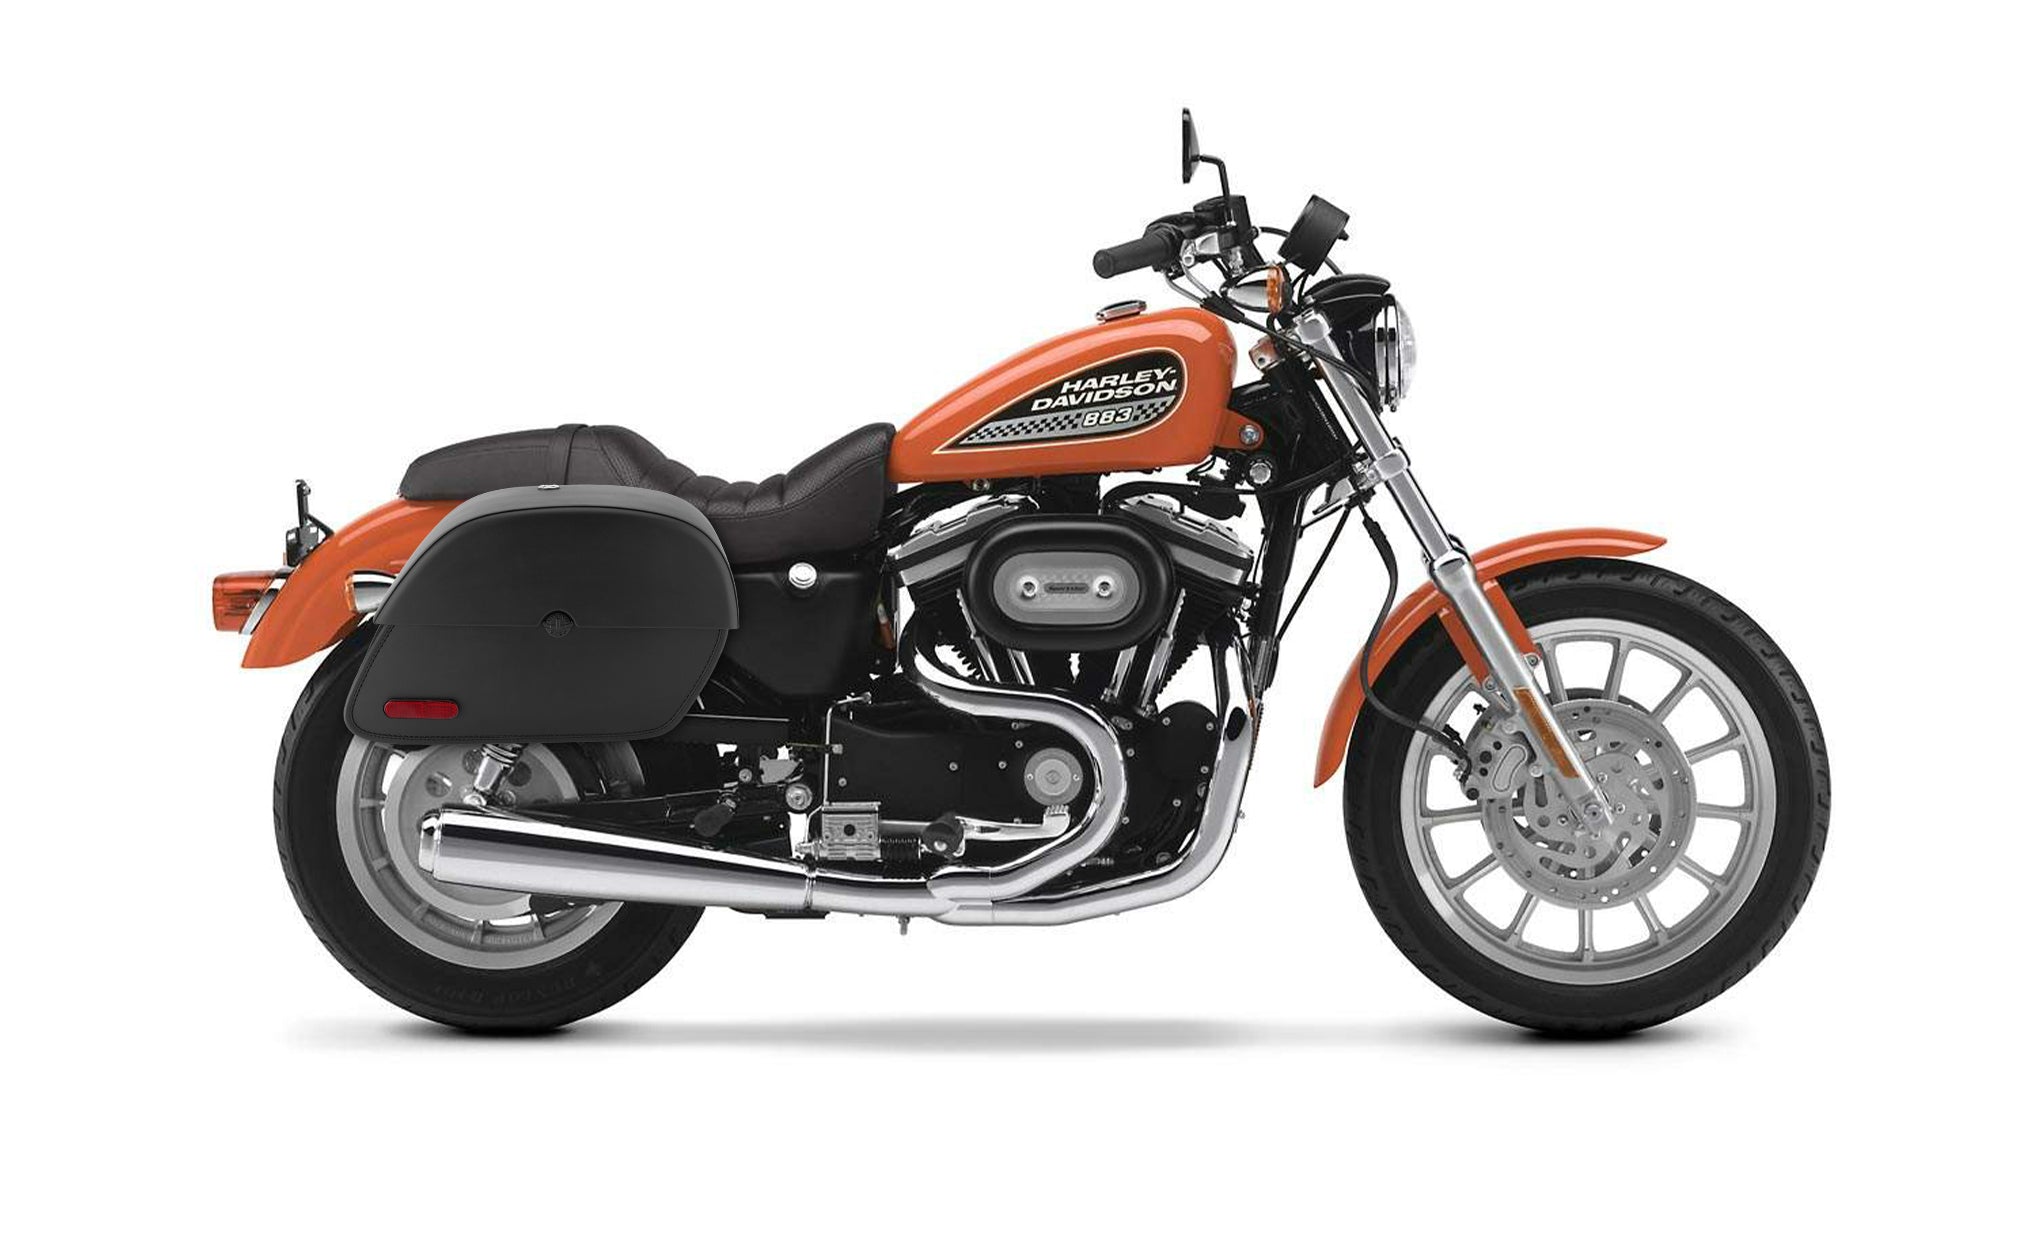 28L - Panzer Medium Quick Mount Leather Saddlebags For Harley Sportster 883 Low XL883L @expand